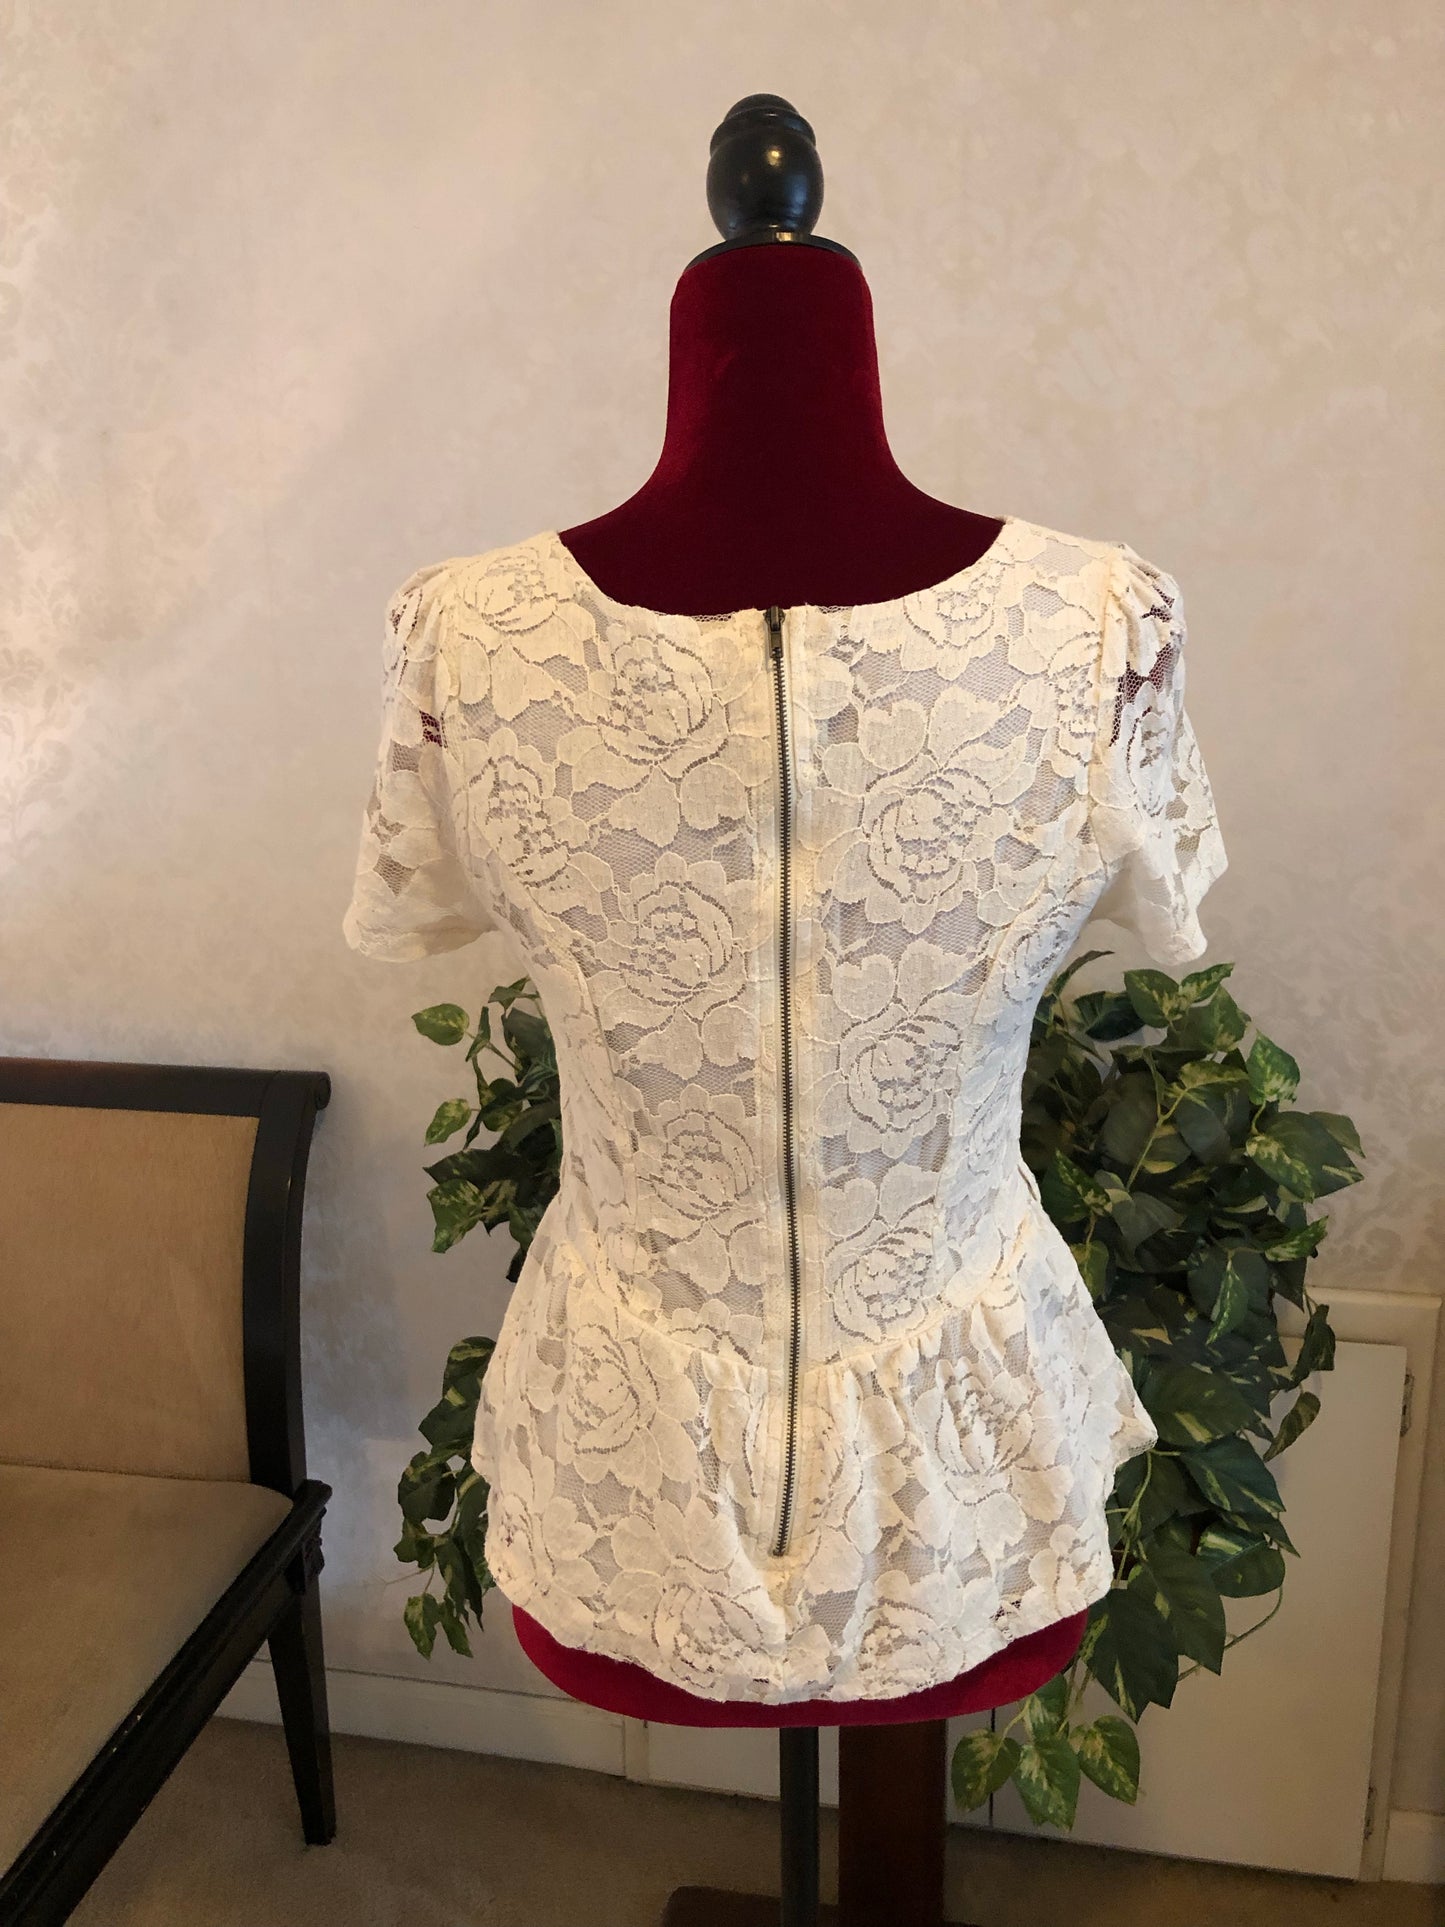 Hearts Brand Lace Fitted Blouse, Size Medium - Gently Used